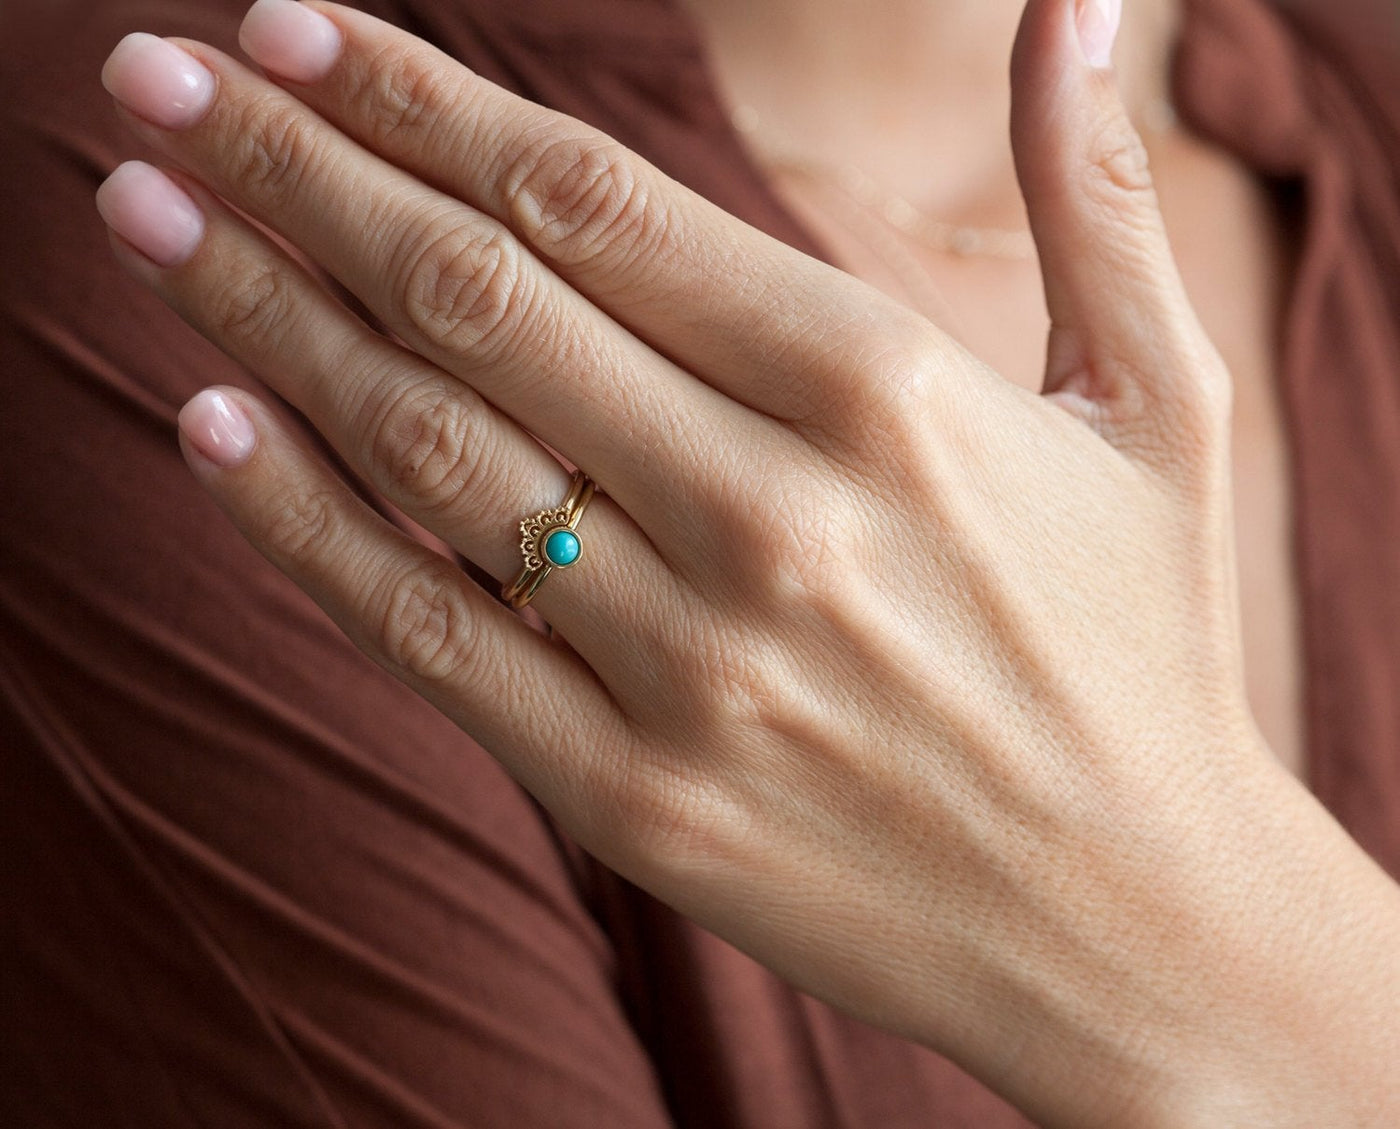 Blue Turquoise Ring With Matching Gold Lace Band